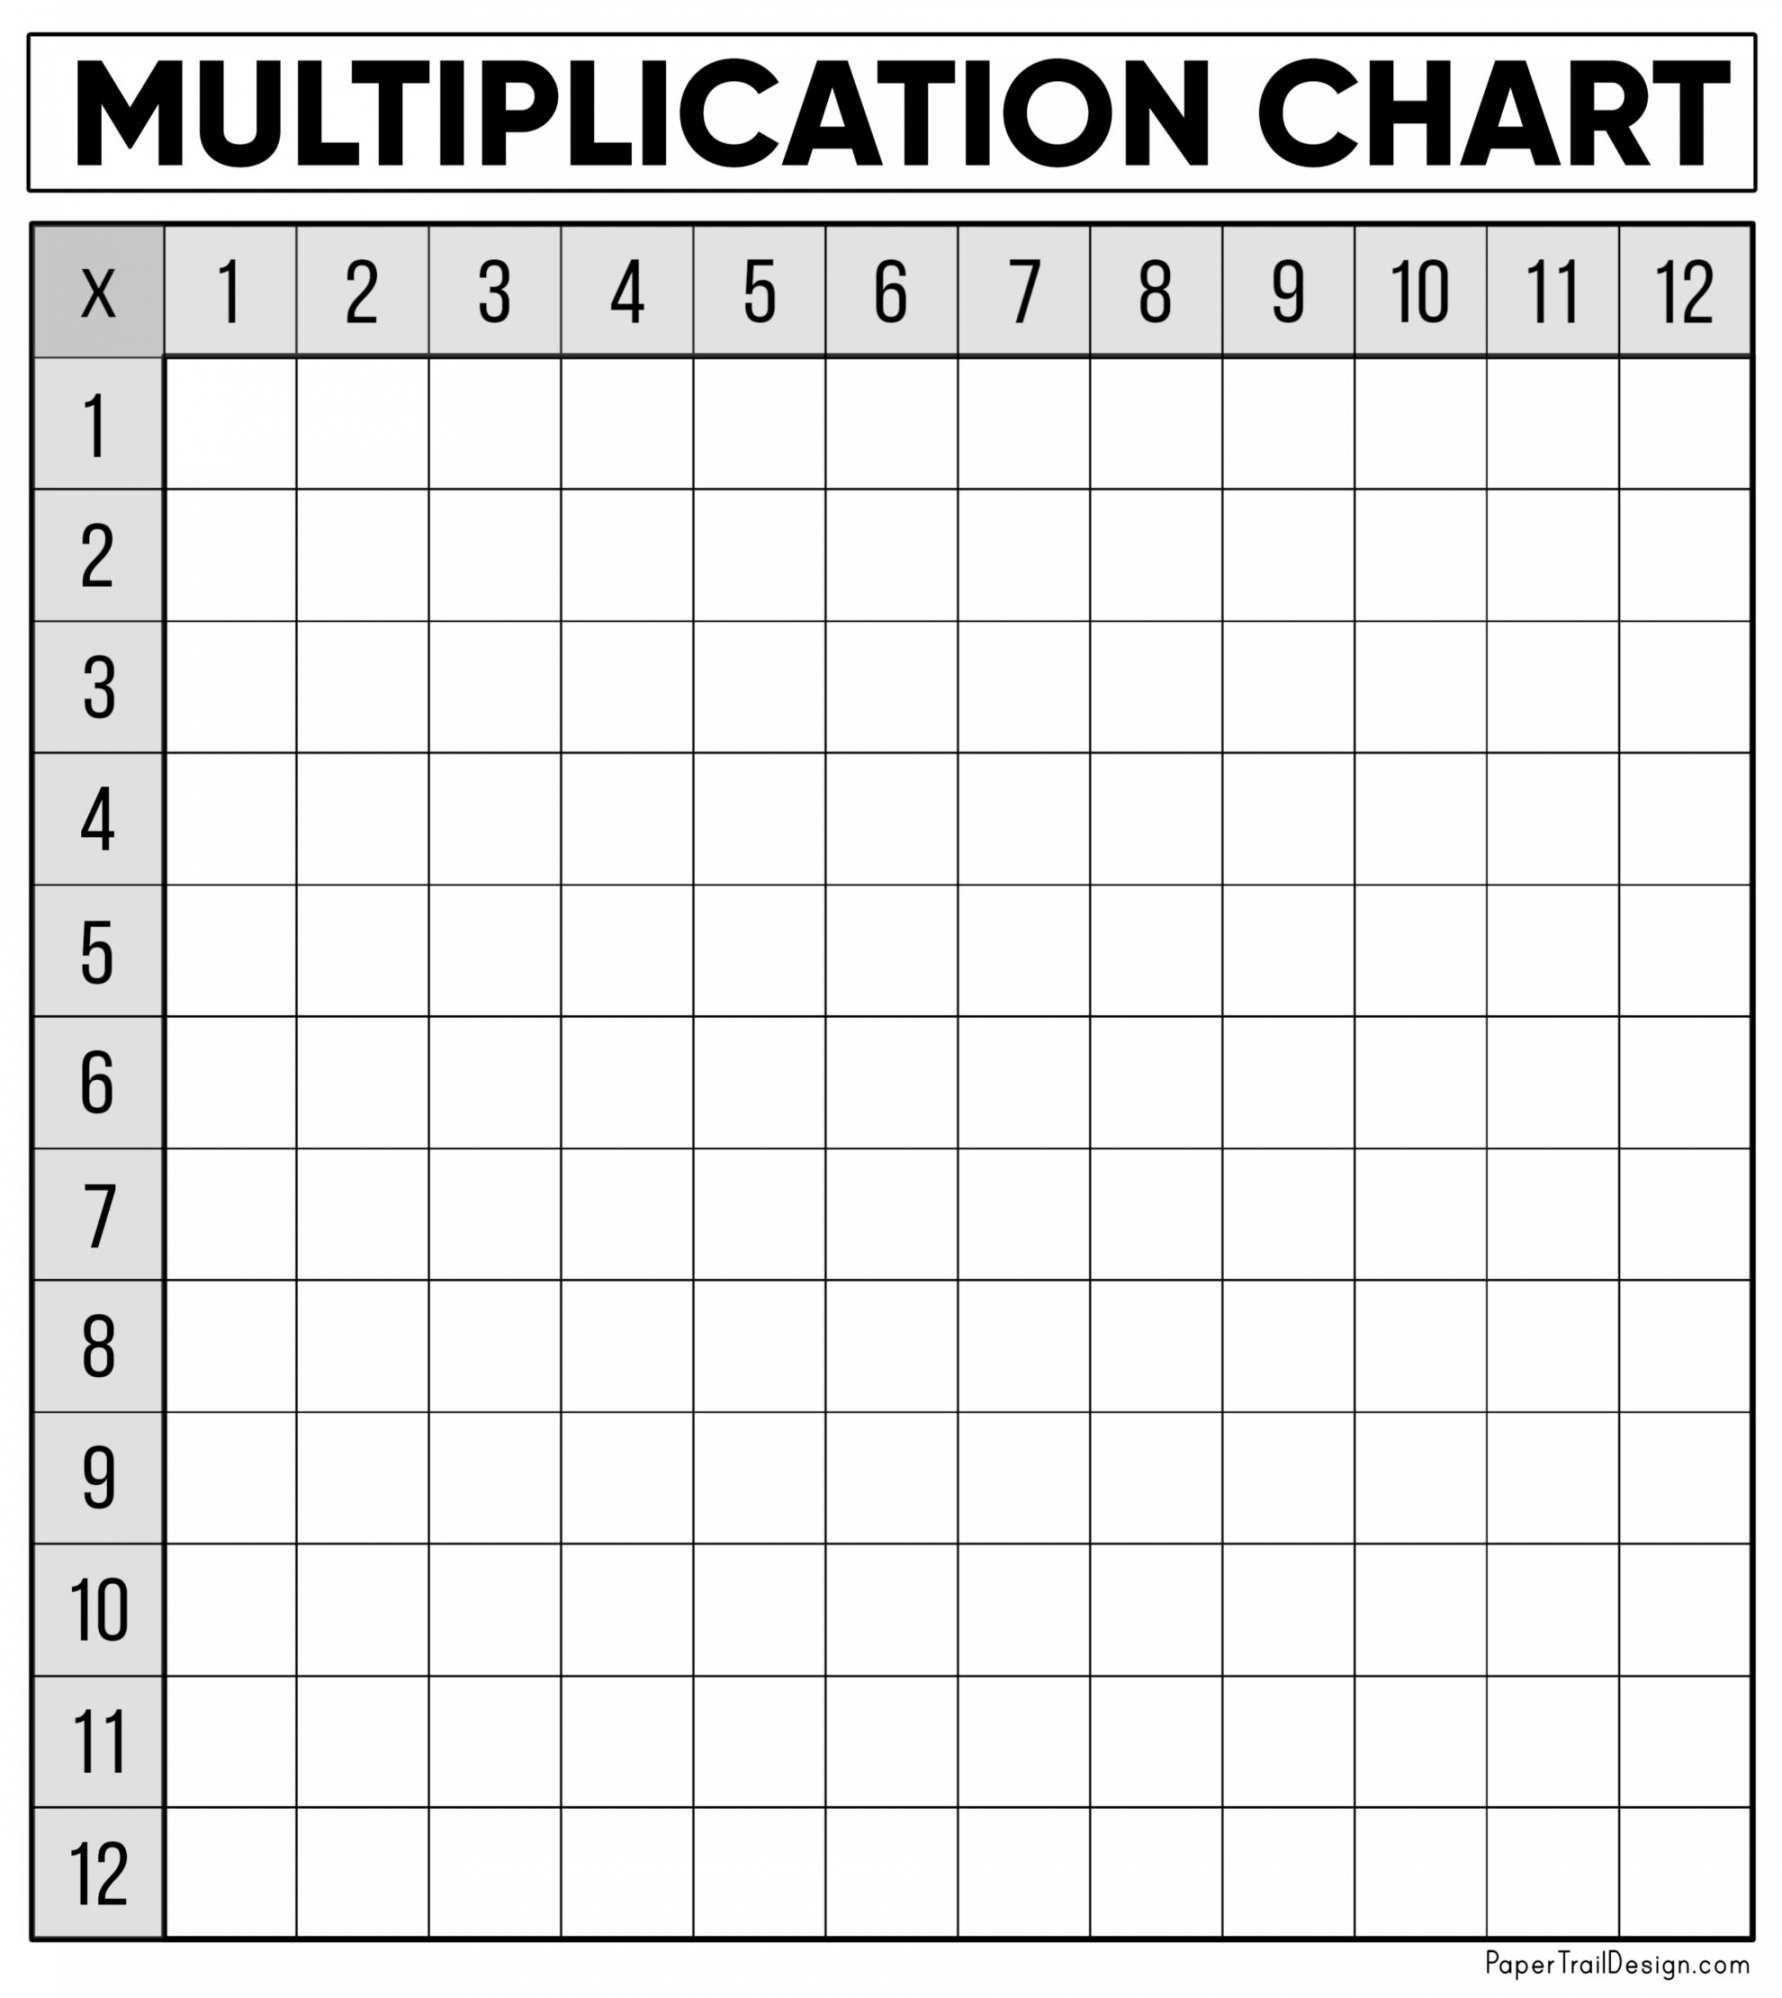 Free Multiplication Chart Printable - Paper Trail Design - FREE Printables - Blank Multiplication Chart 0 12